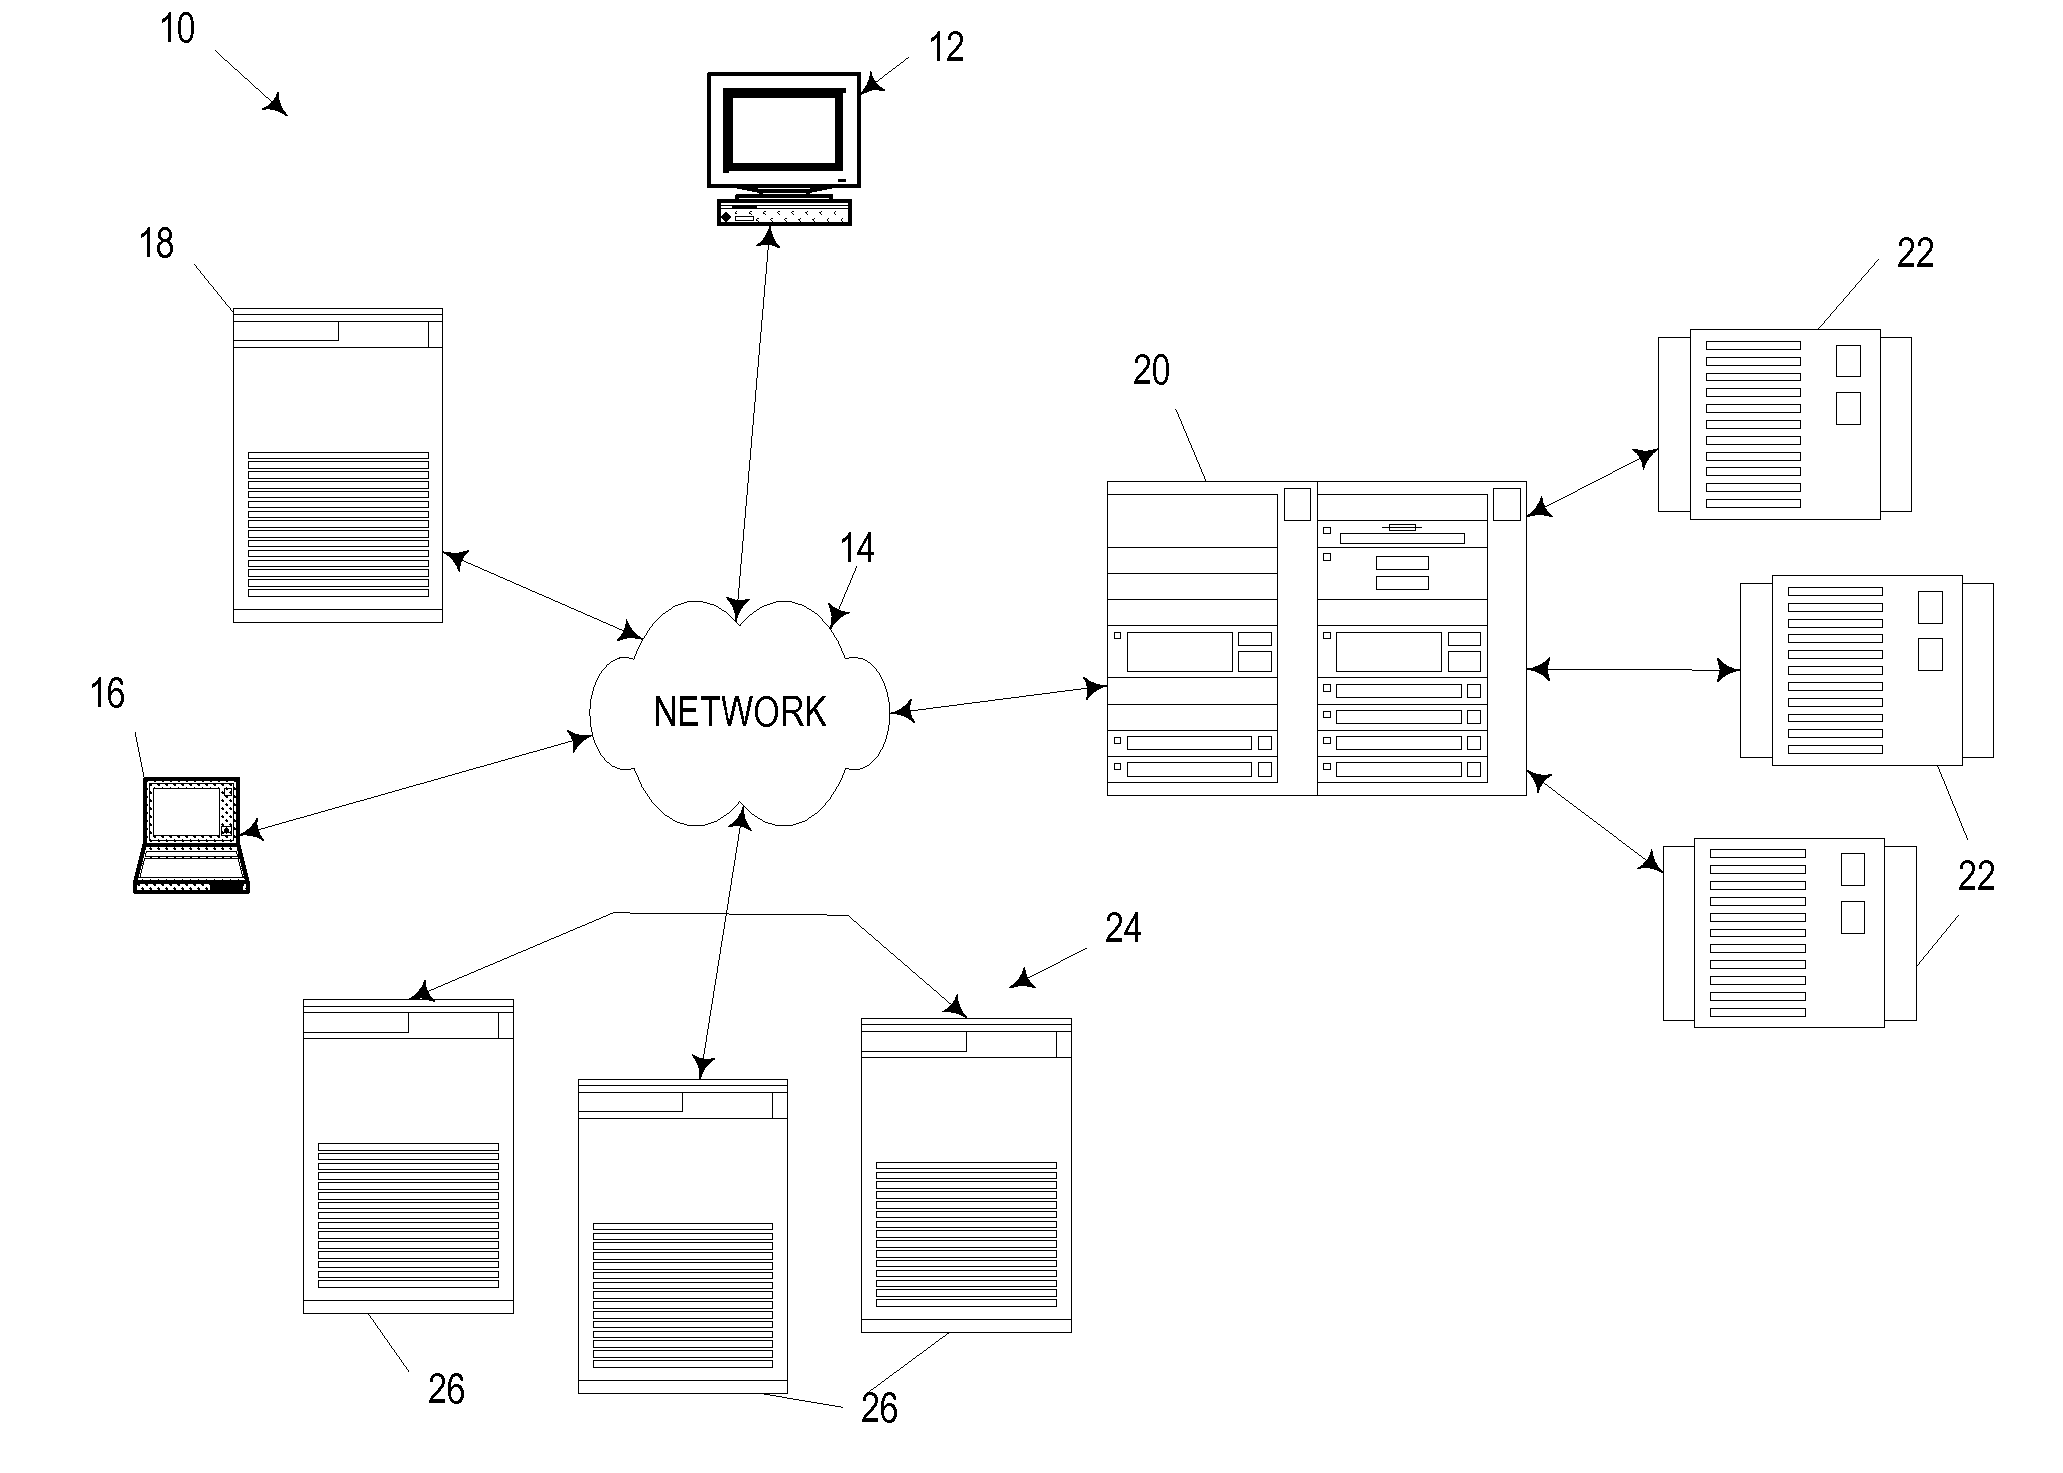 Pictorial-based user interface management of computer hardware components